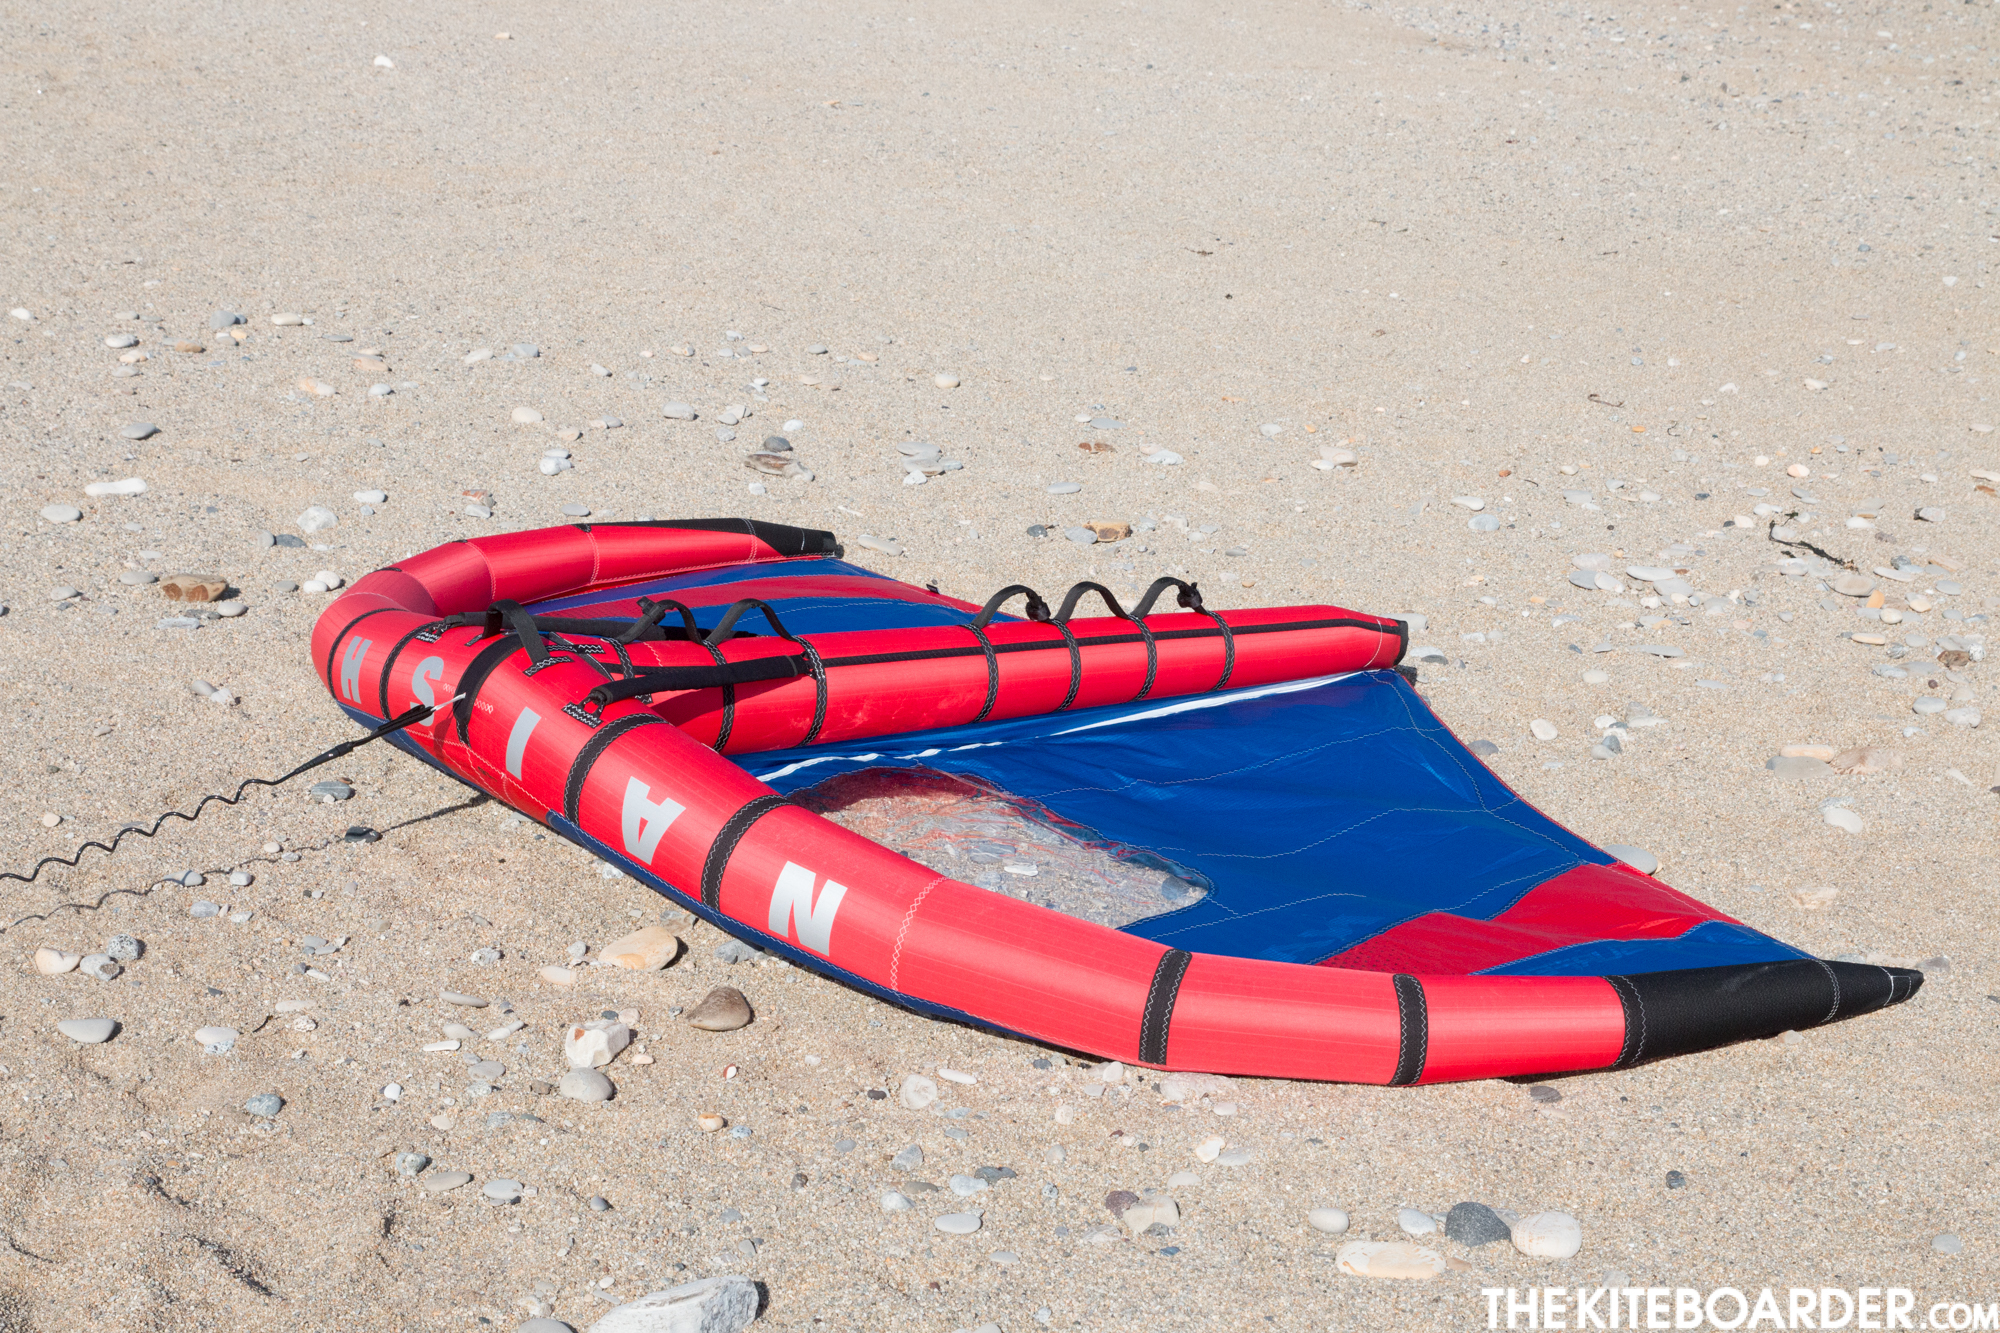 Tkb Review: 2021 NAISH Wing-Surfer - The Kiteboarder Magazine